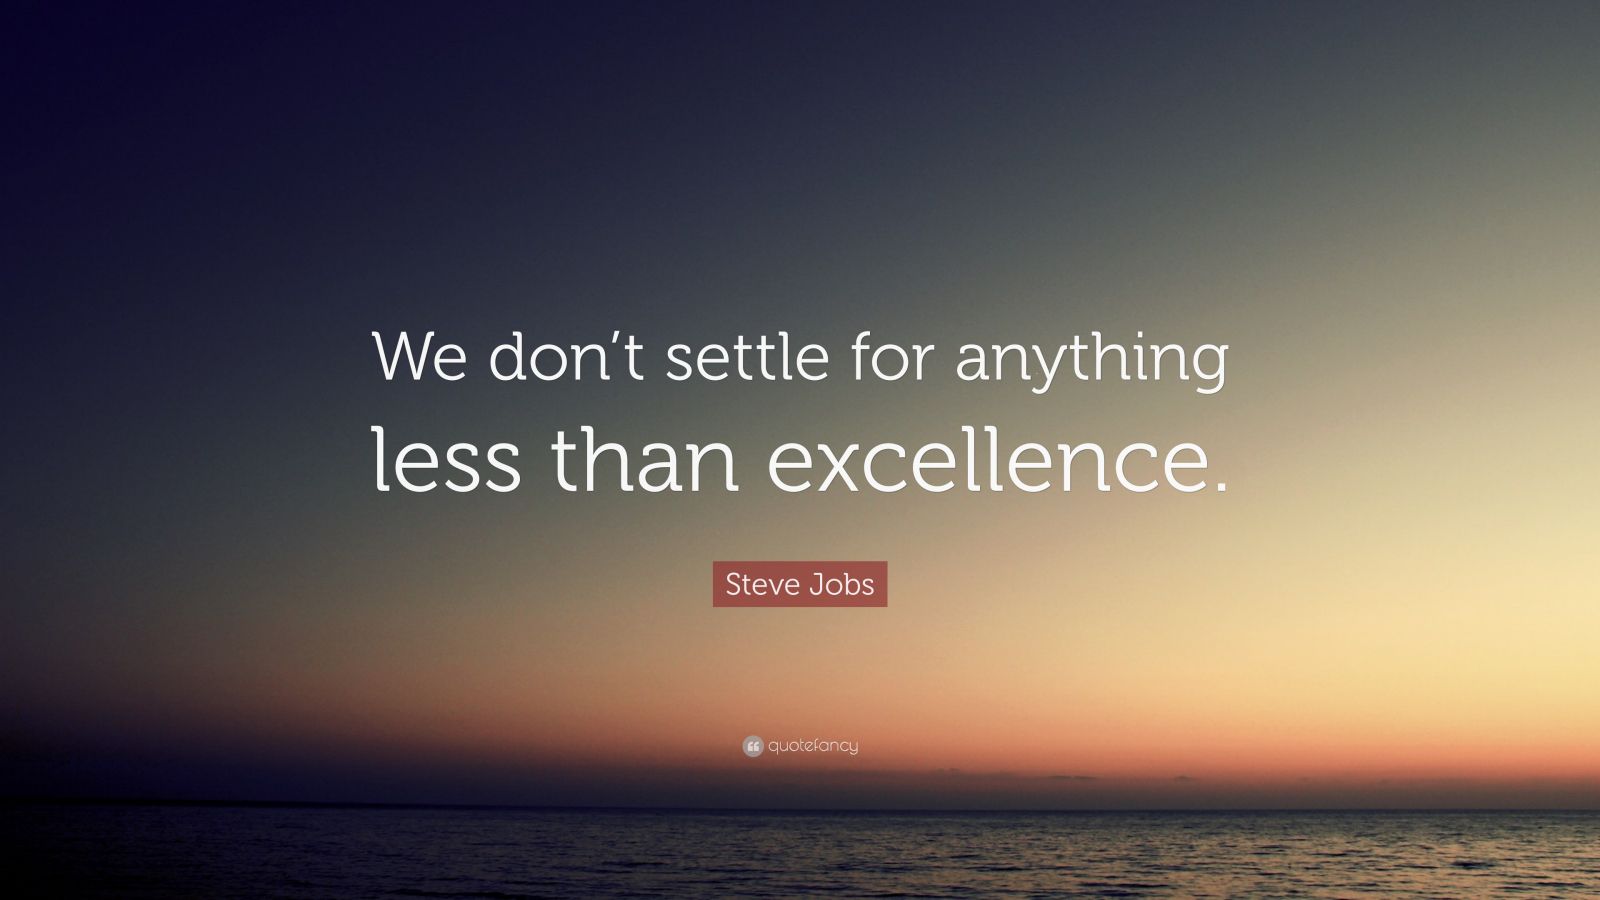 Steve Jobs Quote: “We don’t settle for anything less than excellence